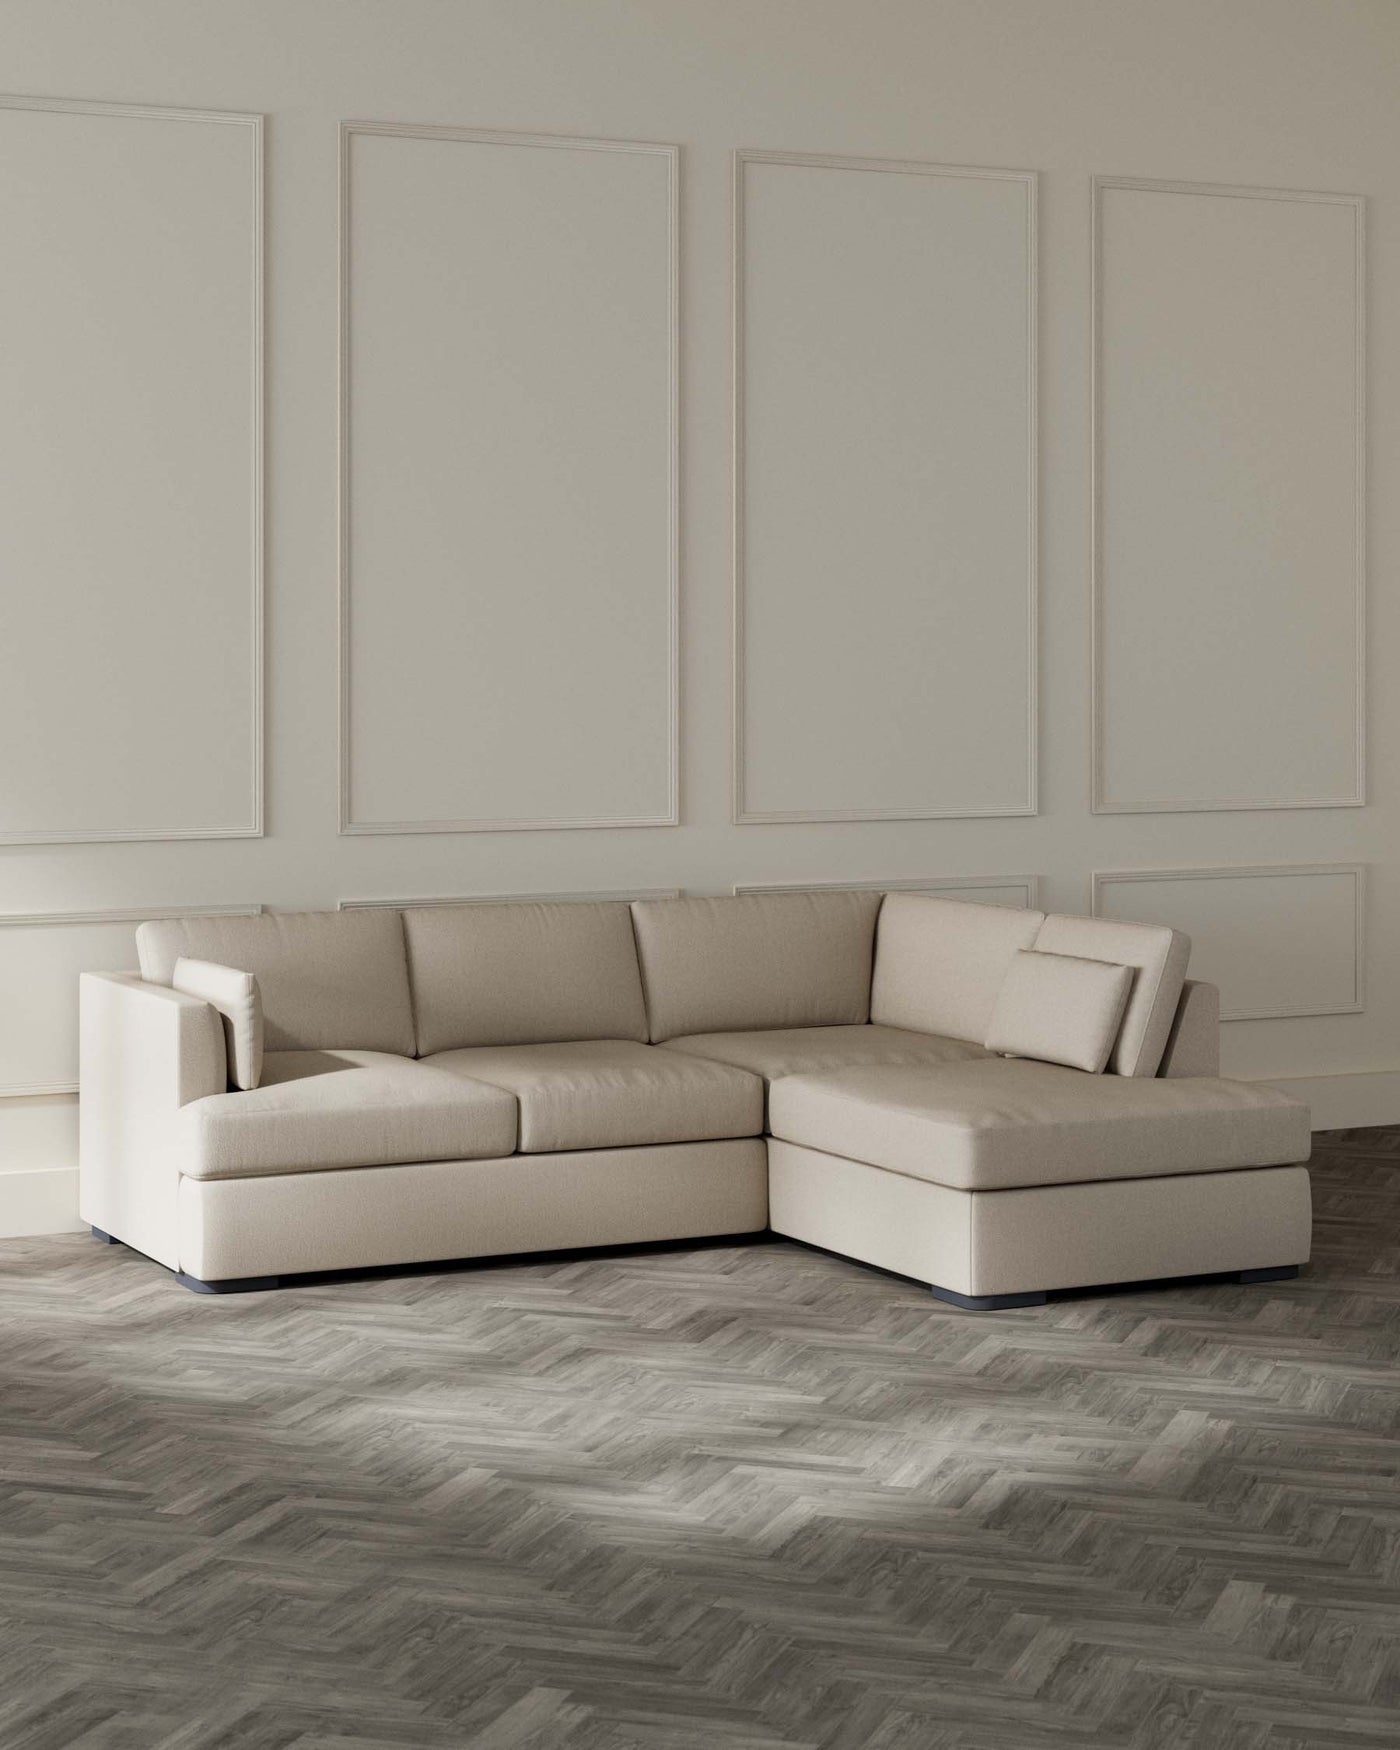 Beige L-shaped sectional sofa with chaise lounge on a herringbone-patterned wooden floor against a wall with decorative panelling.